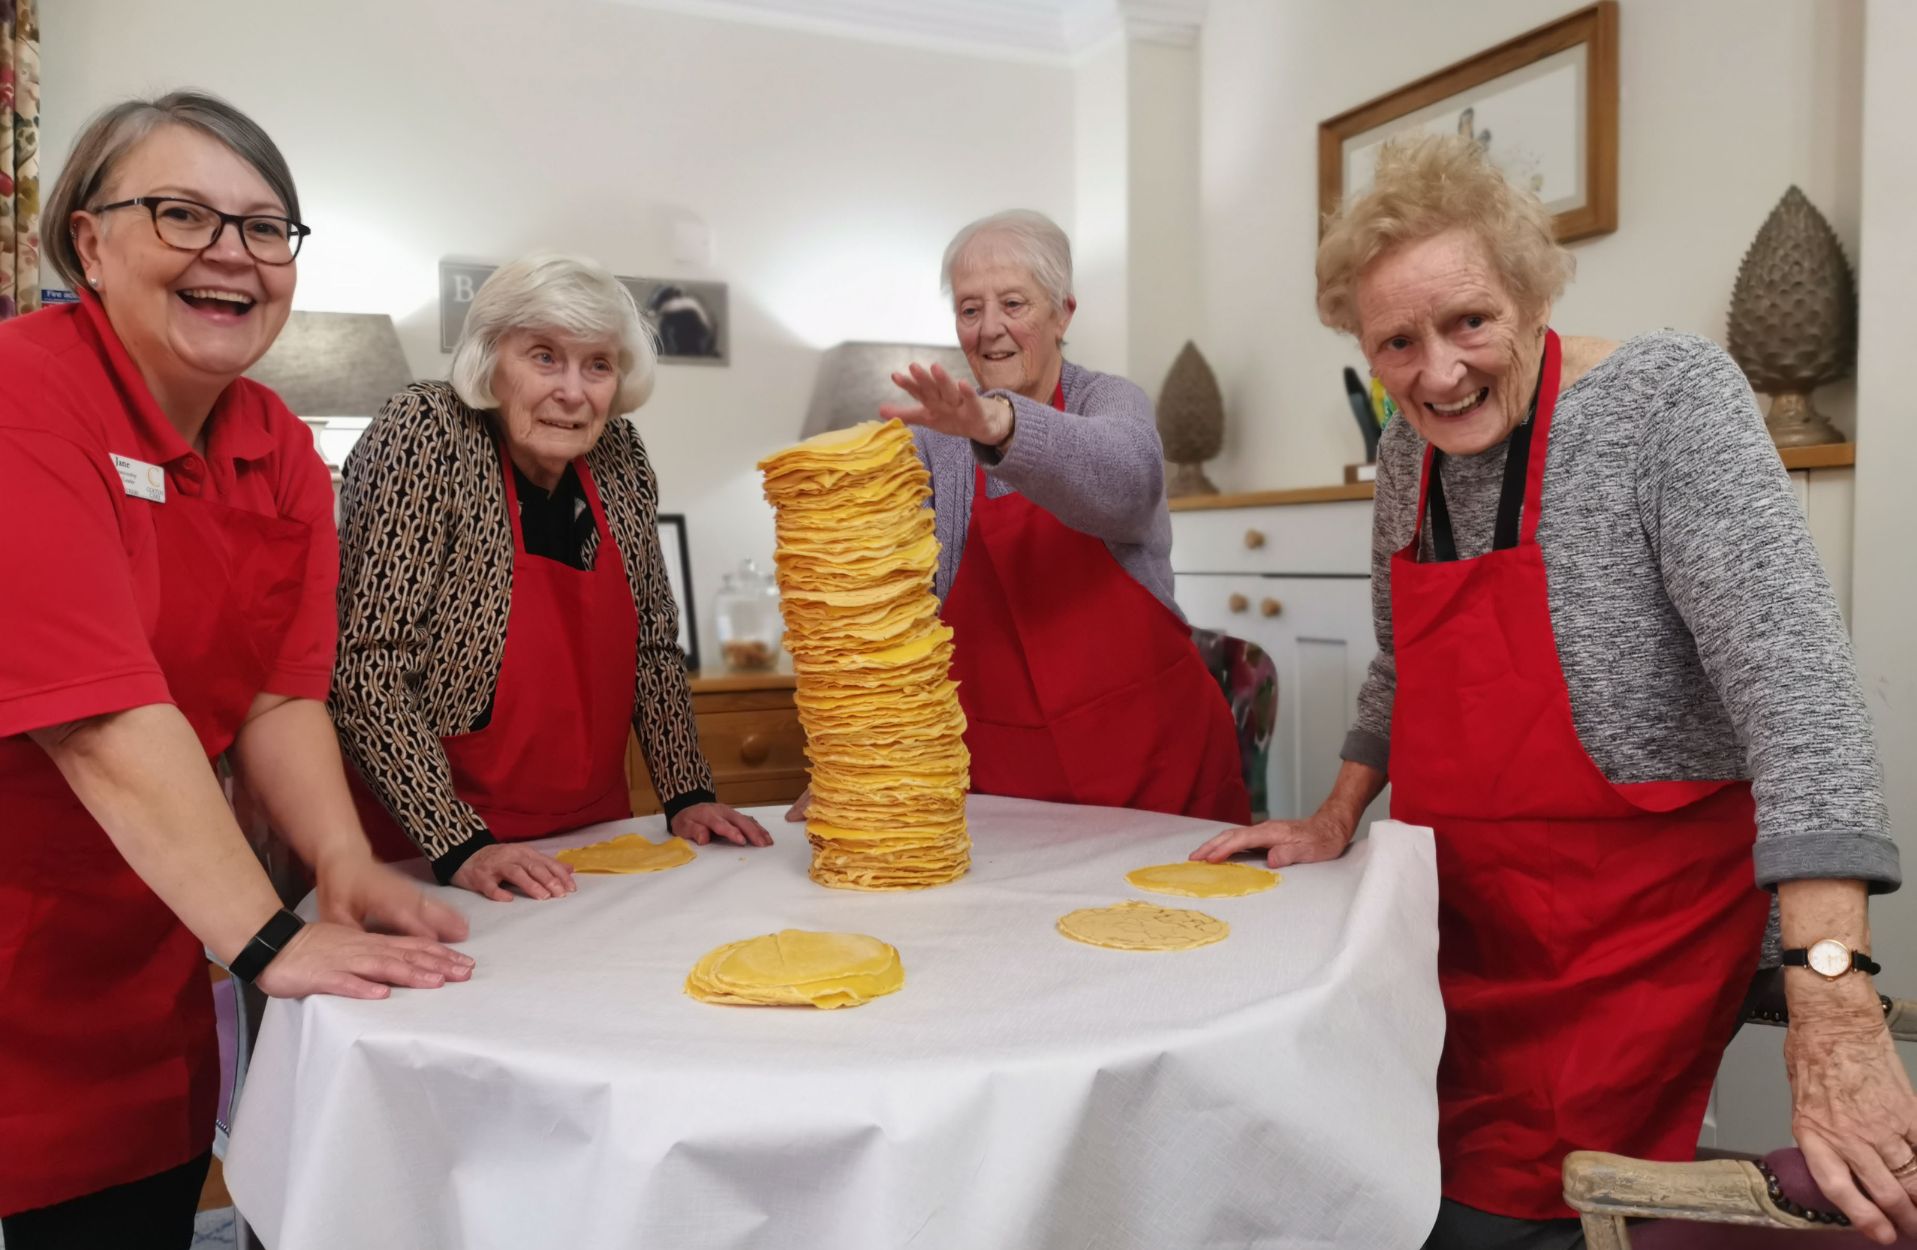 Flippin’ marvellous as one of our New Forest care home cooks up Pancake